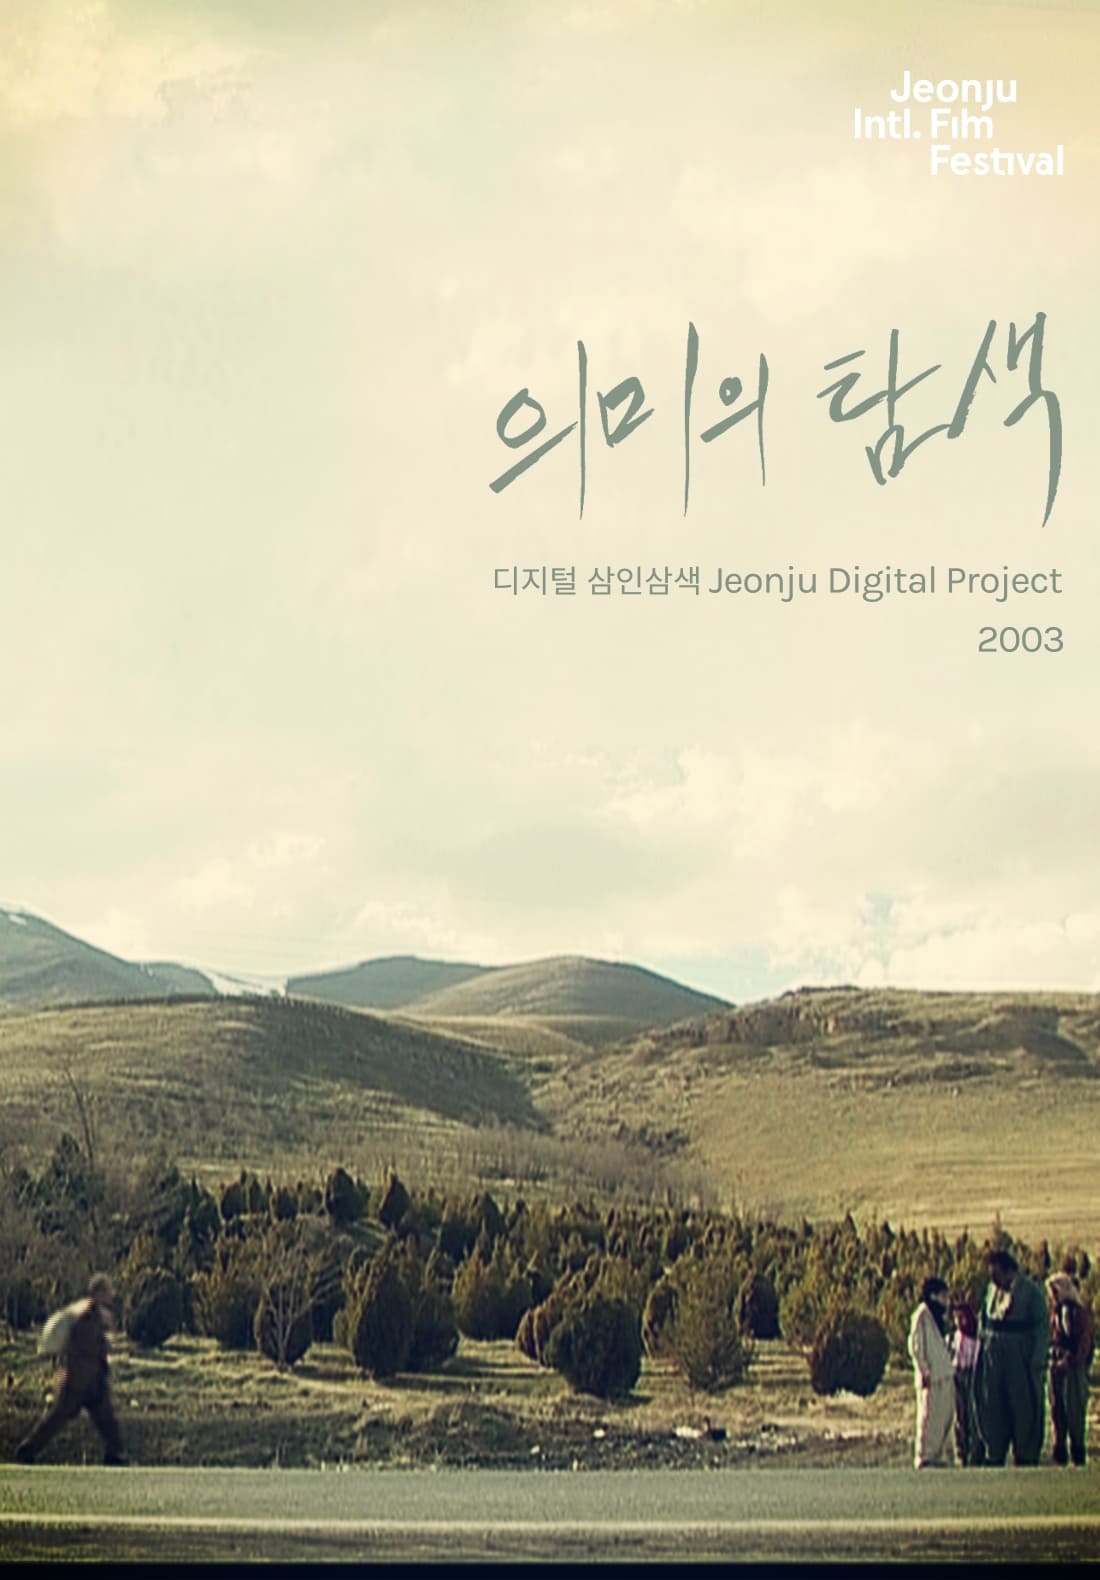 Searching for Meaning: Jeonju Digital Project